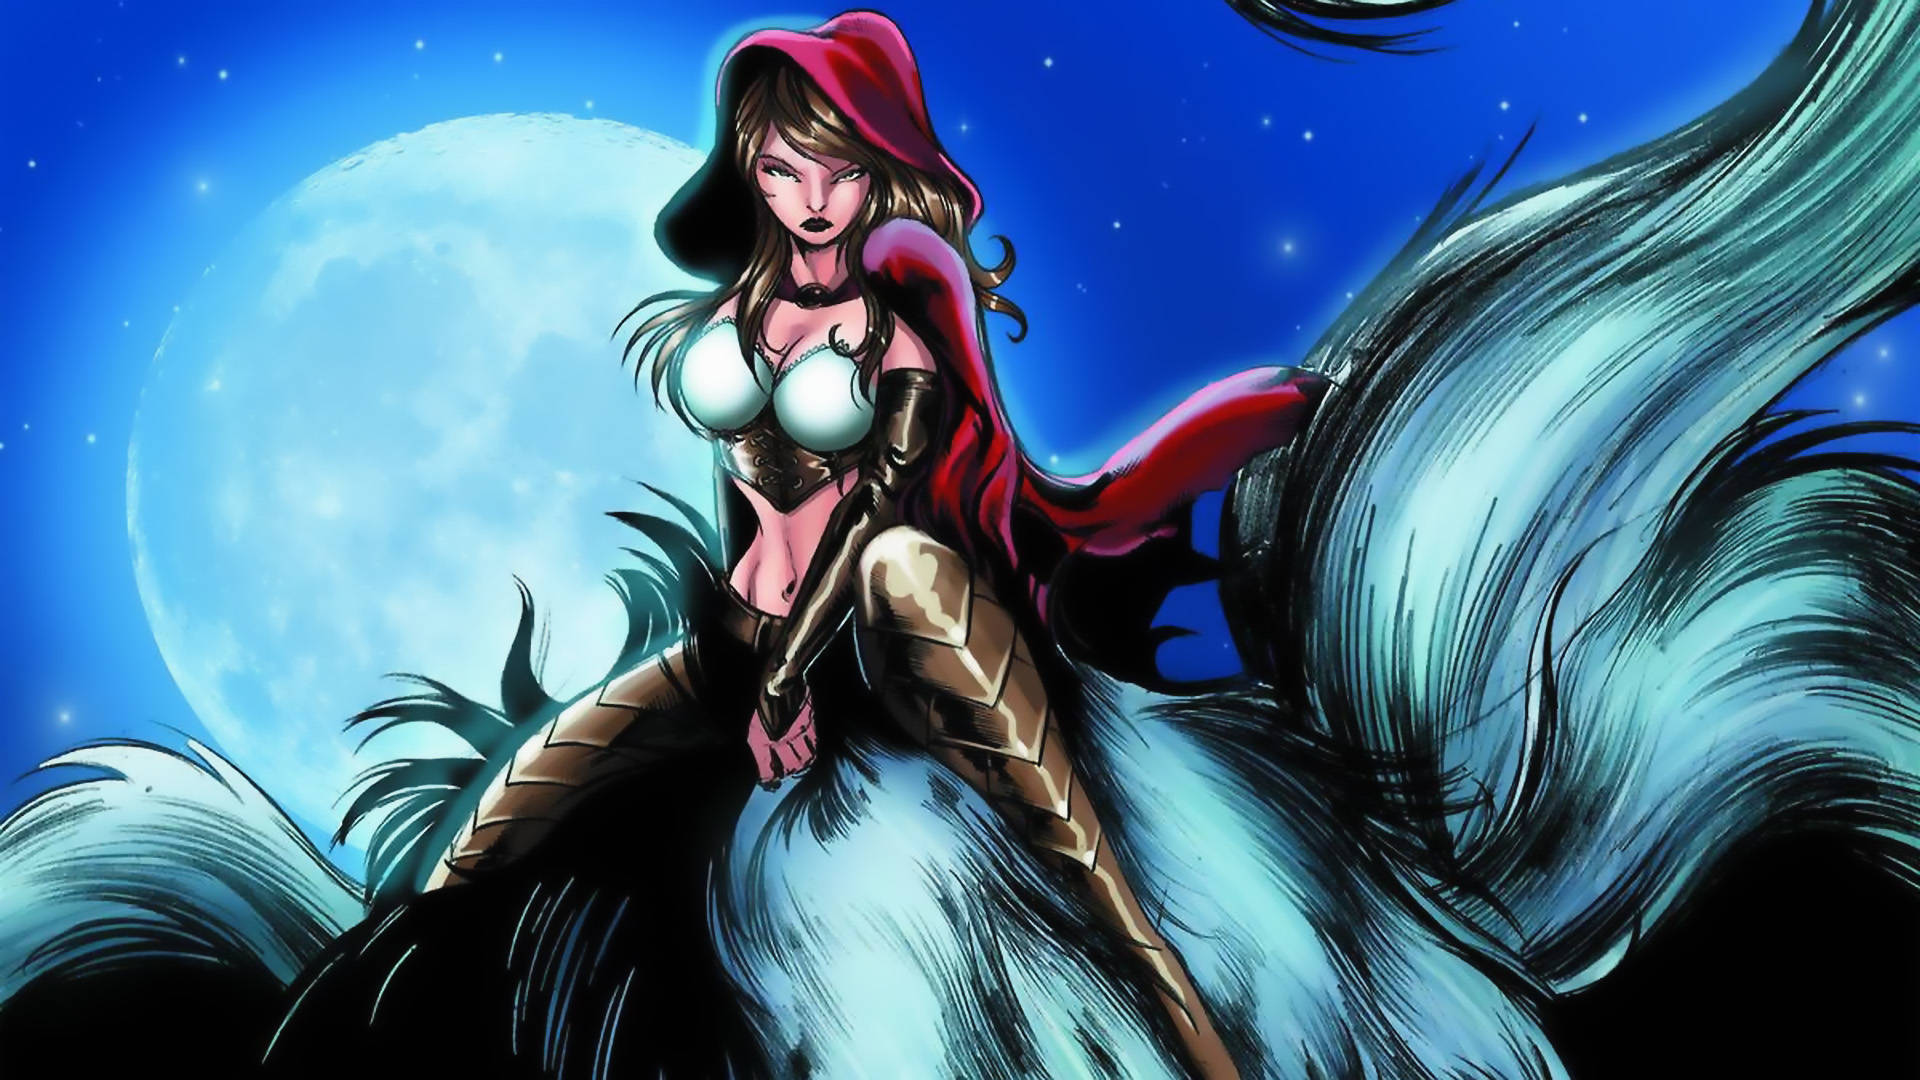 Bad Girl Grimm Fairy Tales Background